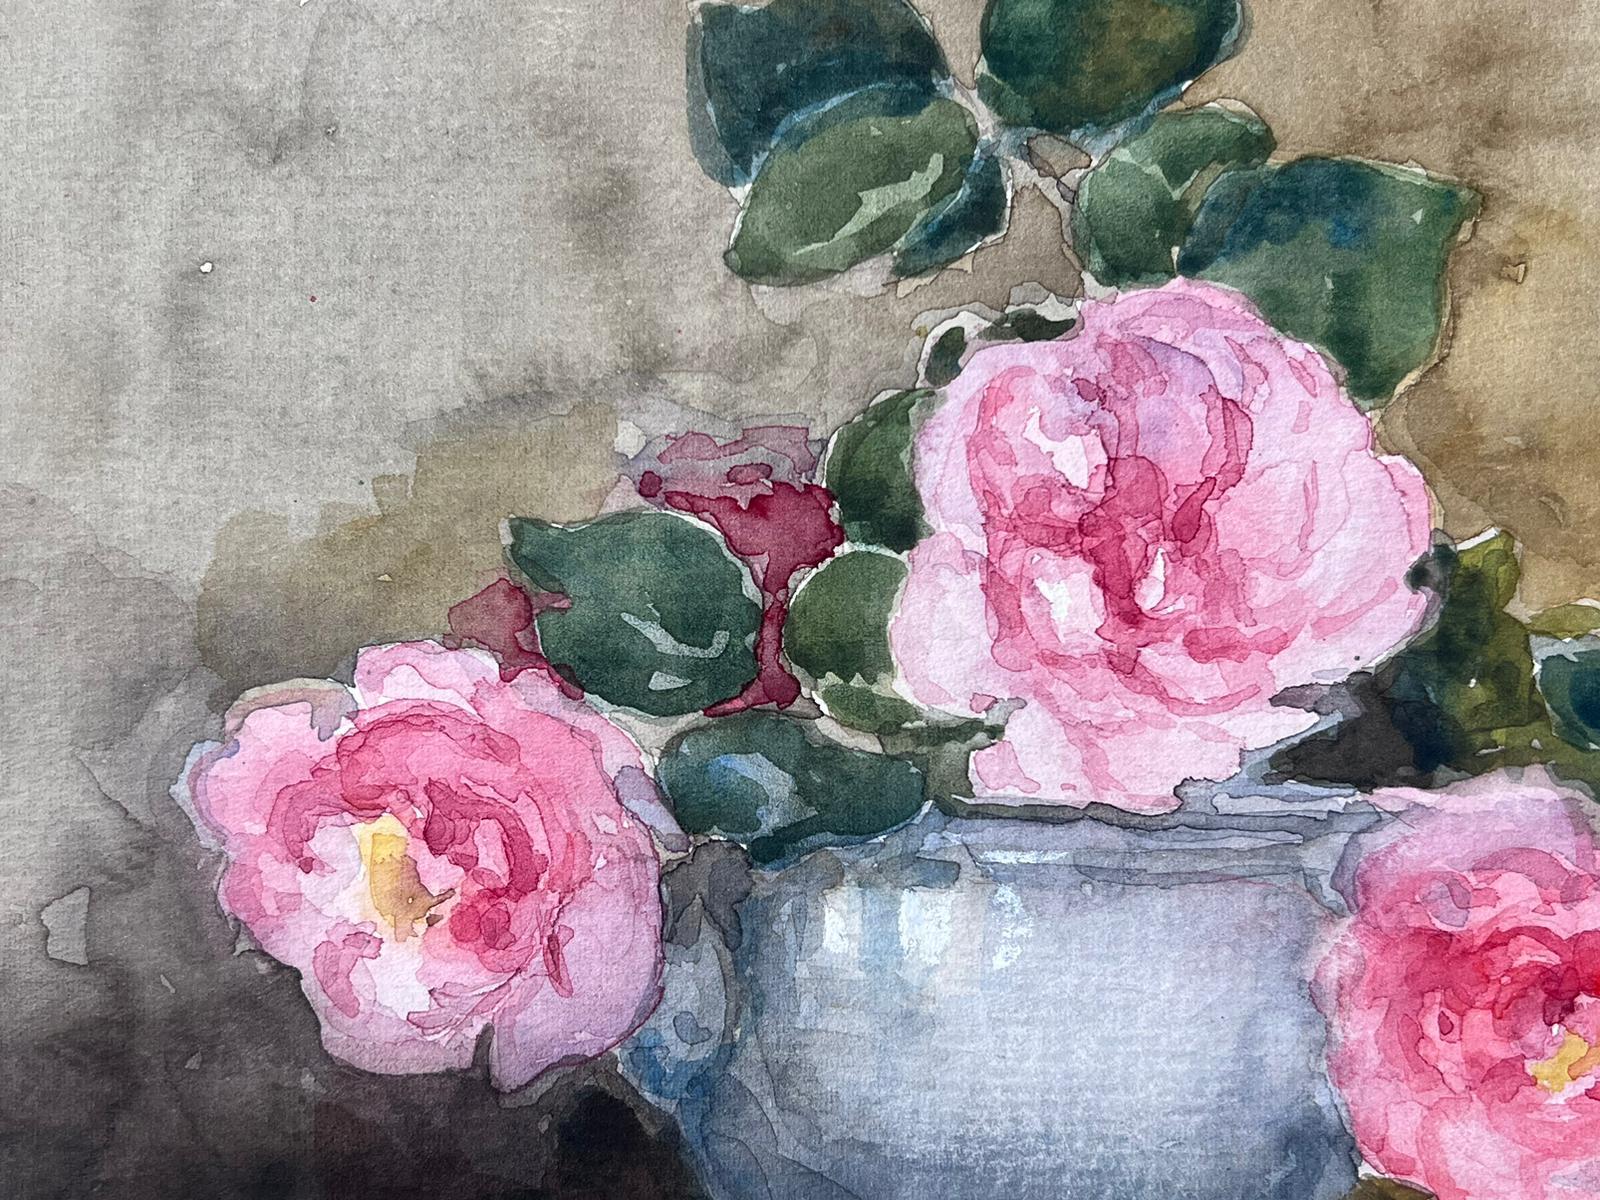 Bowl of Pink Roses Mid 20th Century French Post Impressionist Signed Painting For Sale 1